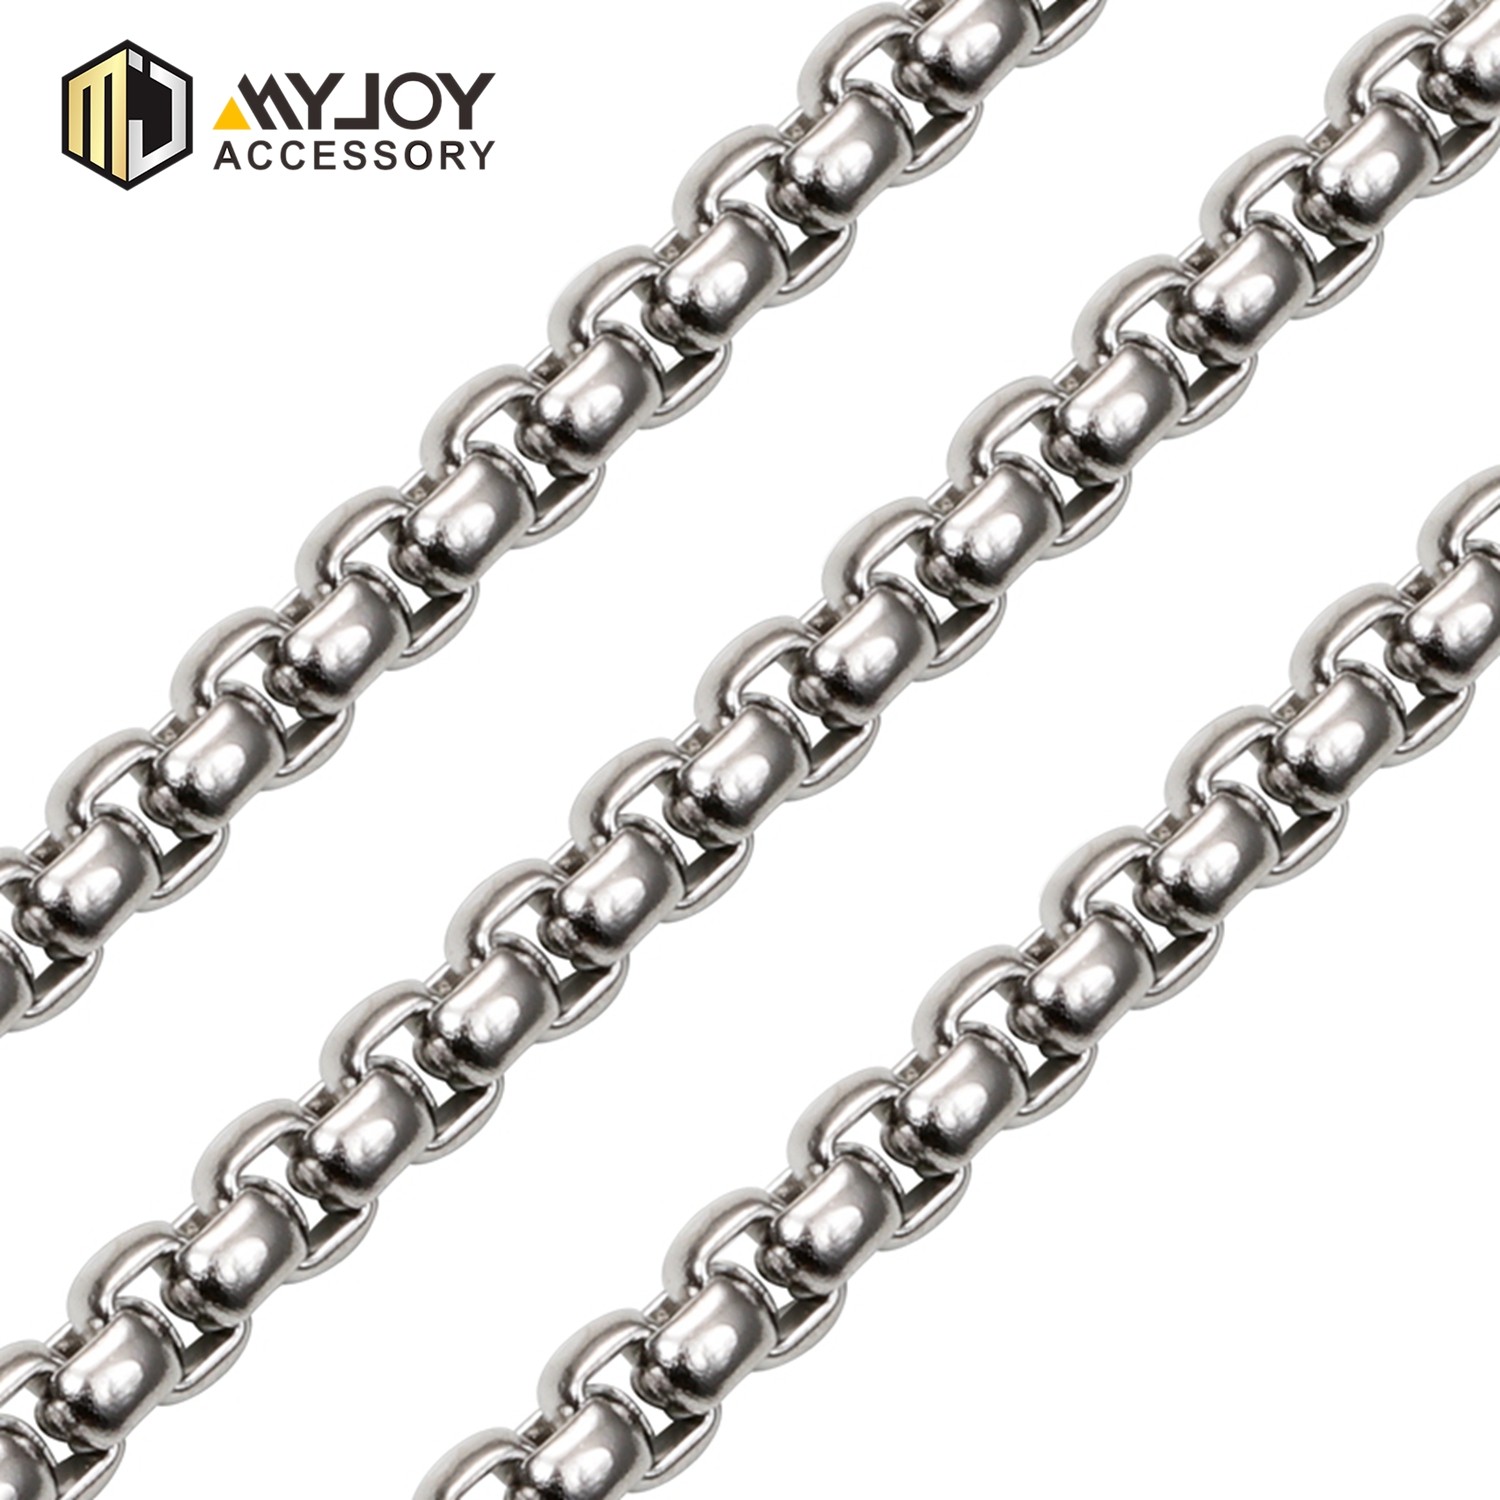 MYJOY vogue handbag chain Suppliers for bags-3